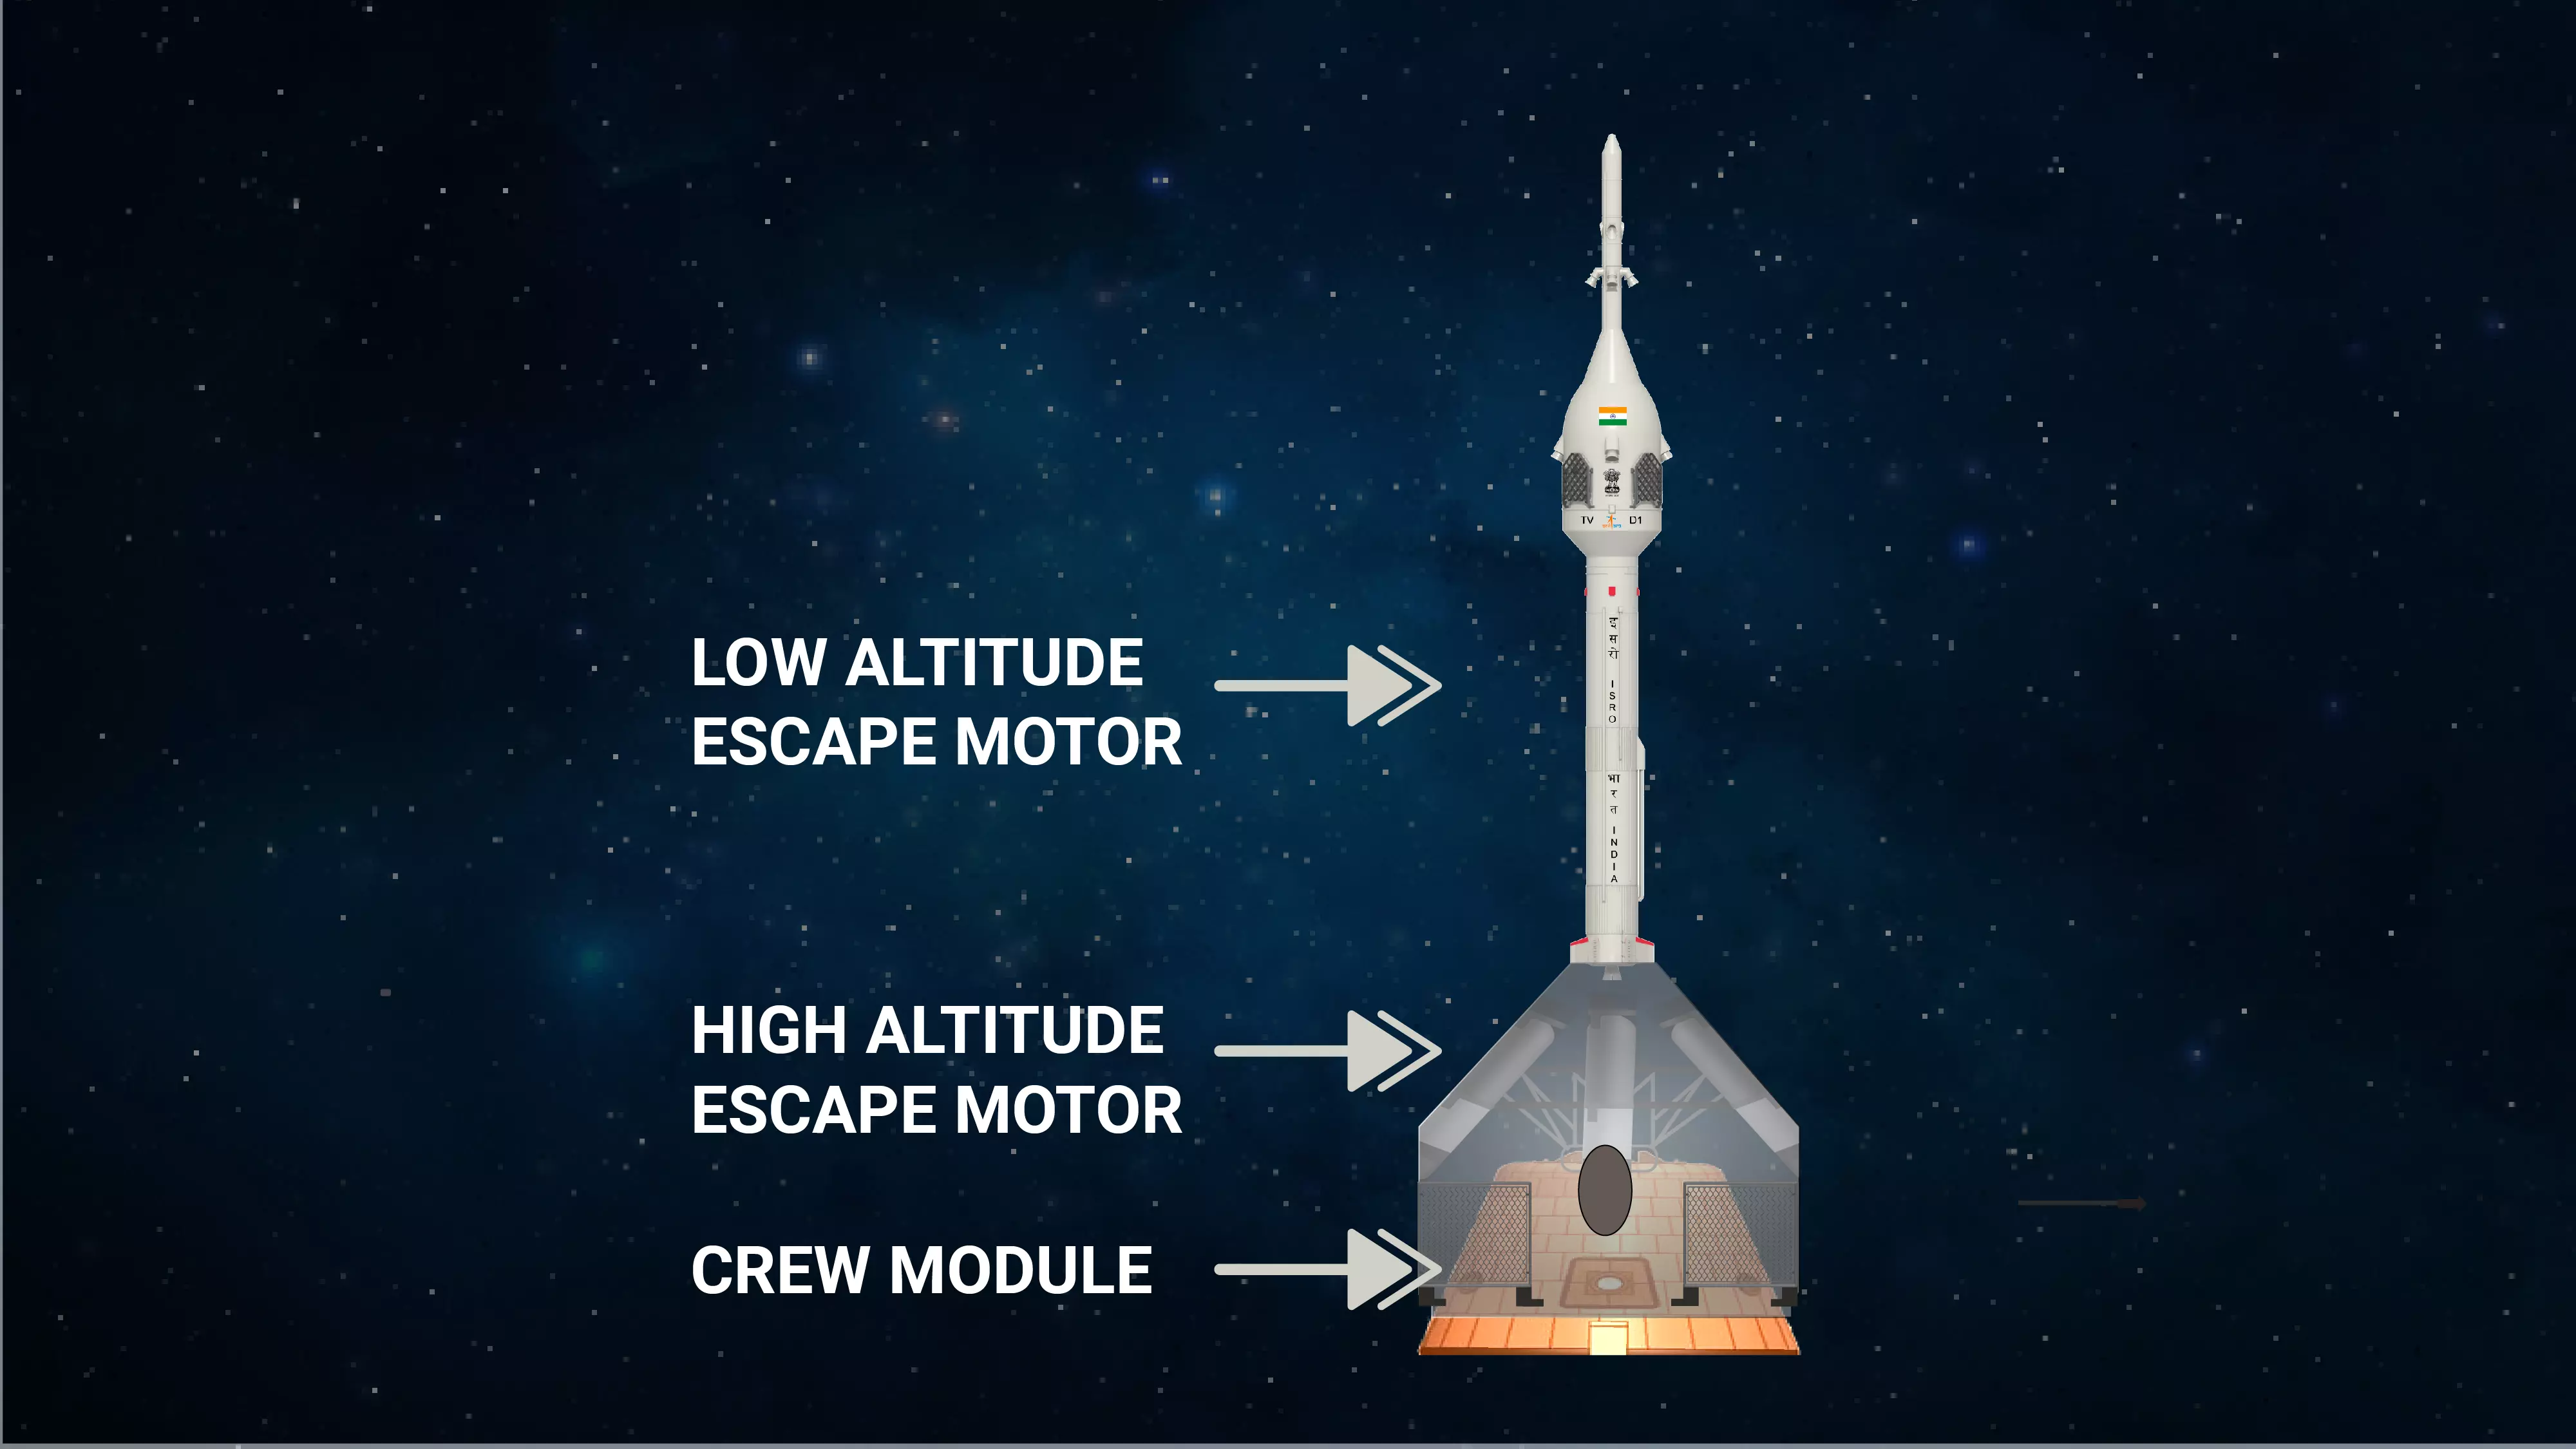 Usually, the payload is placed at the topmost part of the launch vehicles. However, in human-rated launch vehicles, there is a tower-like structure atop the payload, the crew module. This minaret-like structure houses low-altitude and high-altitude escape motor systems, two of the crucial abort escape systems. 